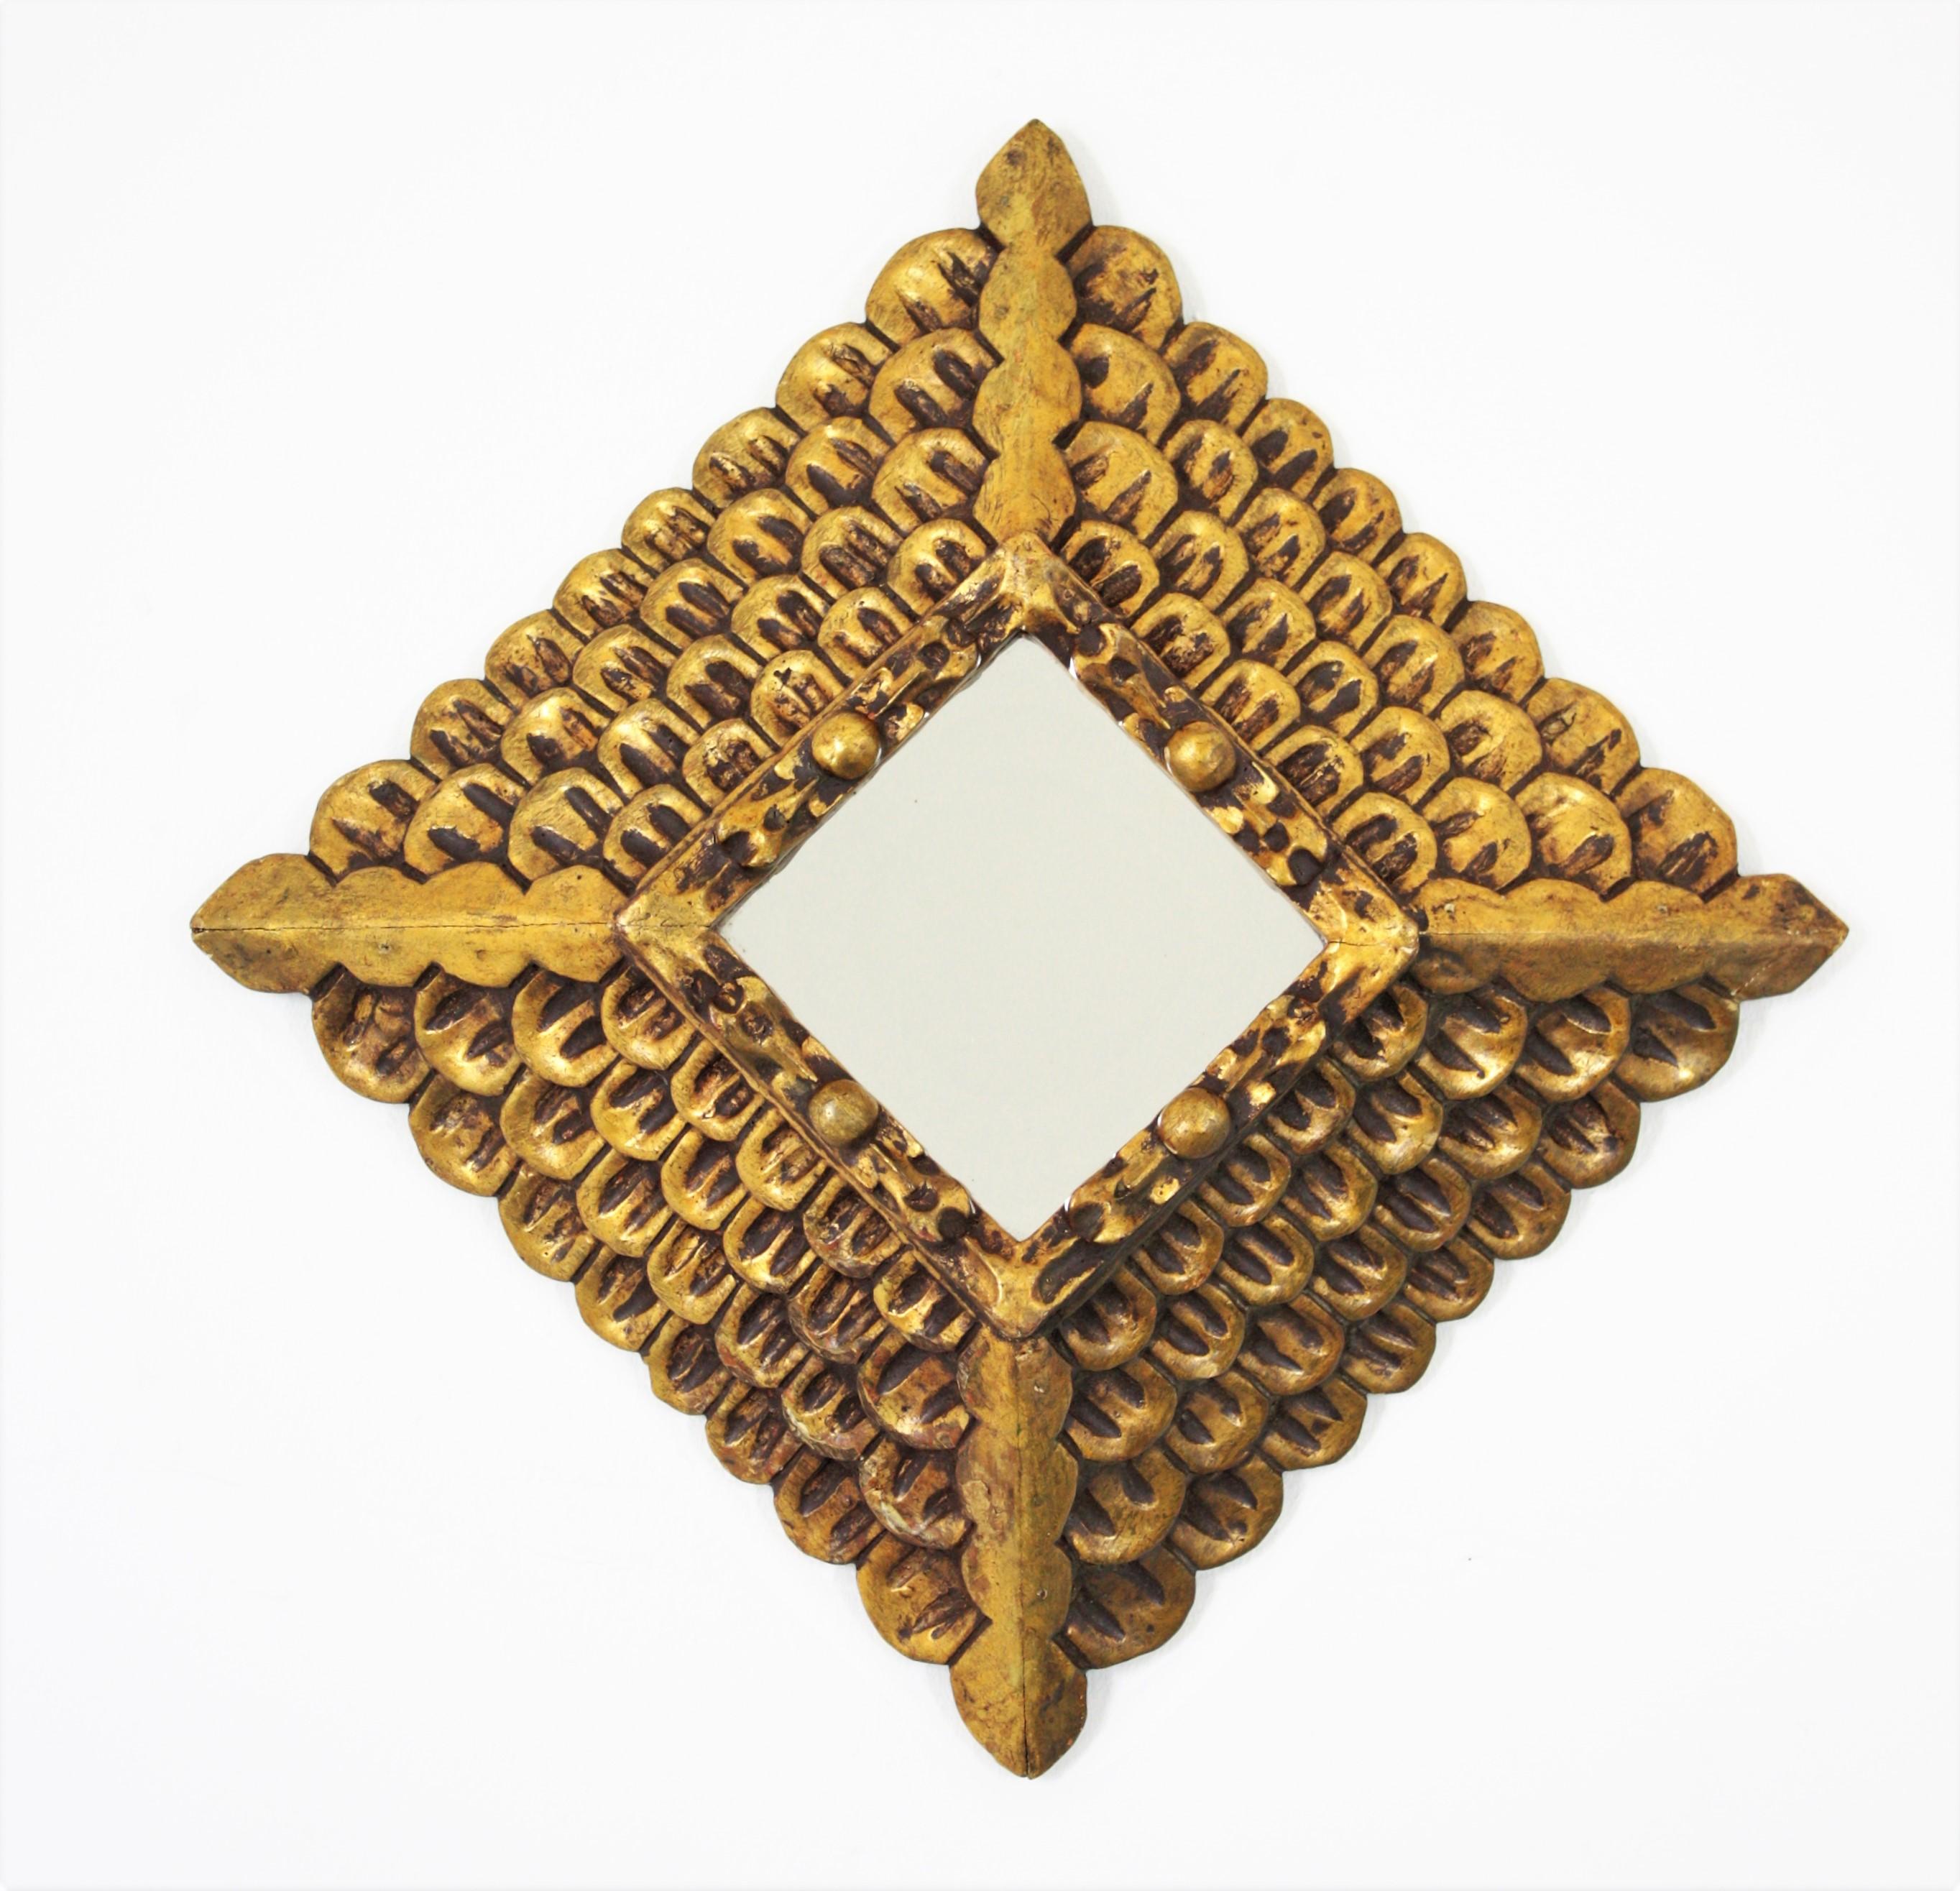 Gorgeous carved giltwood mirror with scalloped frame and gold leaf gilding. Spain, 1940s
It can be hung in rhombus position or in square position.
This mirror has a richly carved four layered frame with scalloped decorations thorough.
Terrific